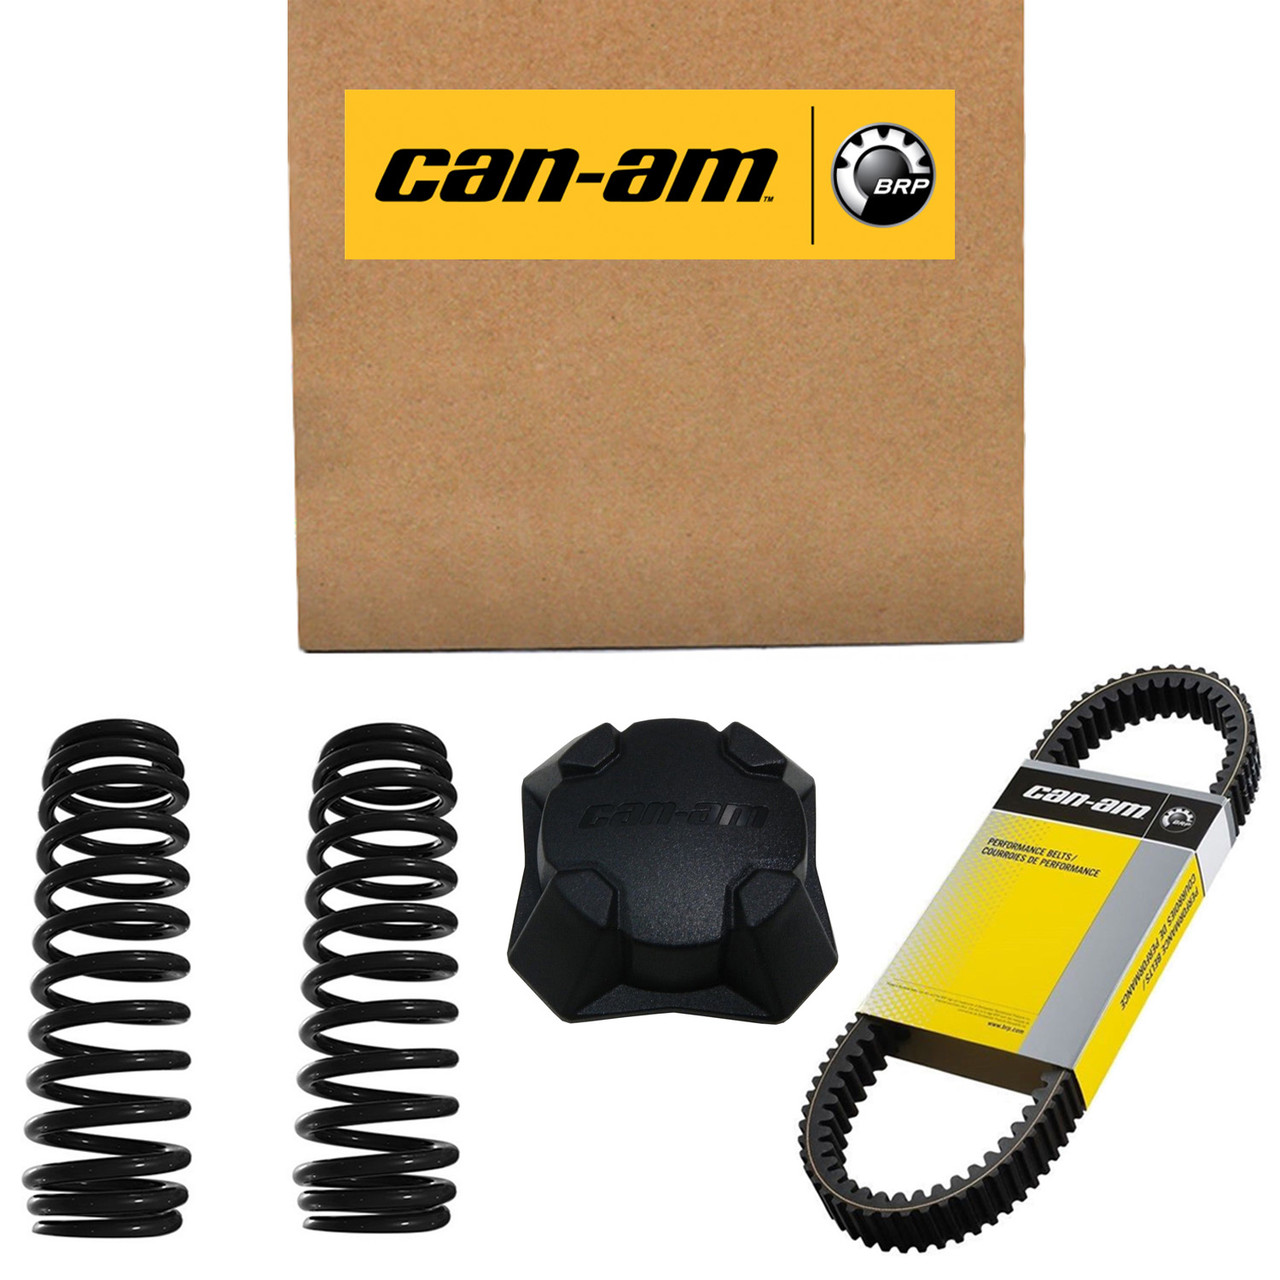 Can-Am New OEM Relflector, 708300812